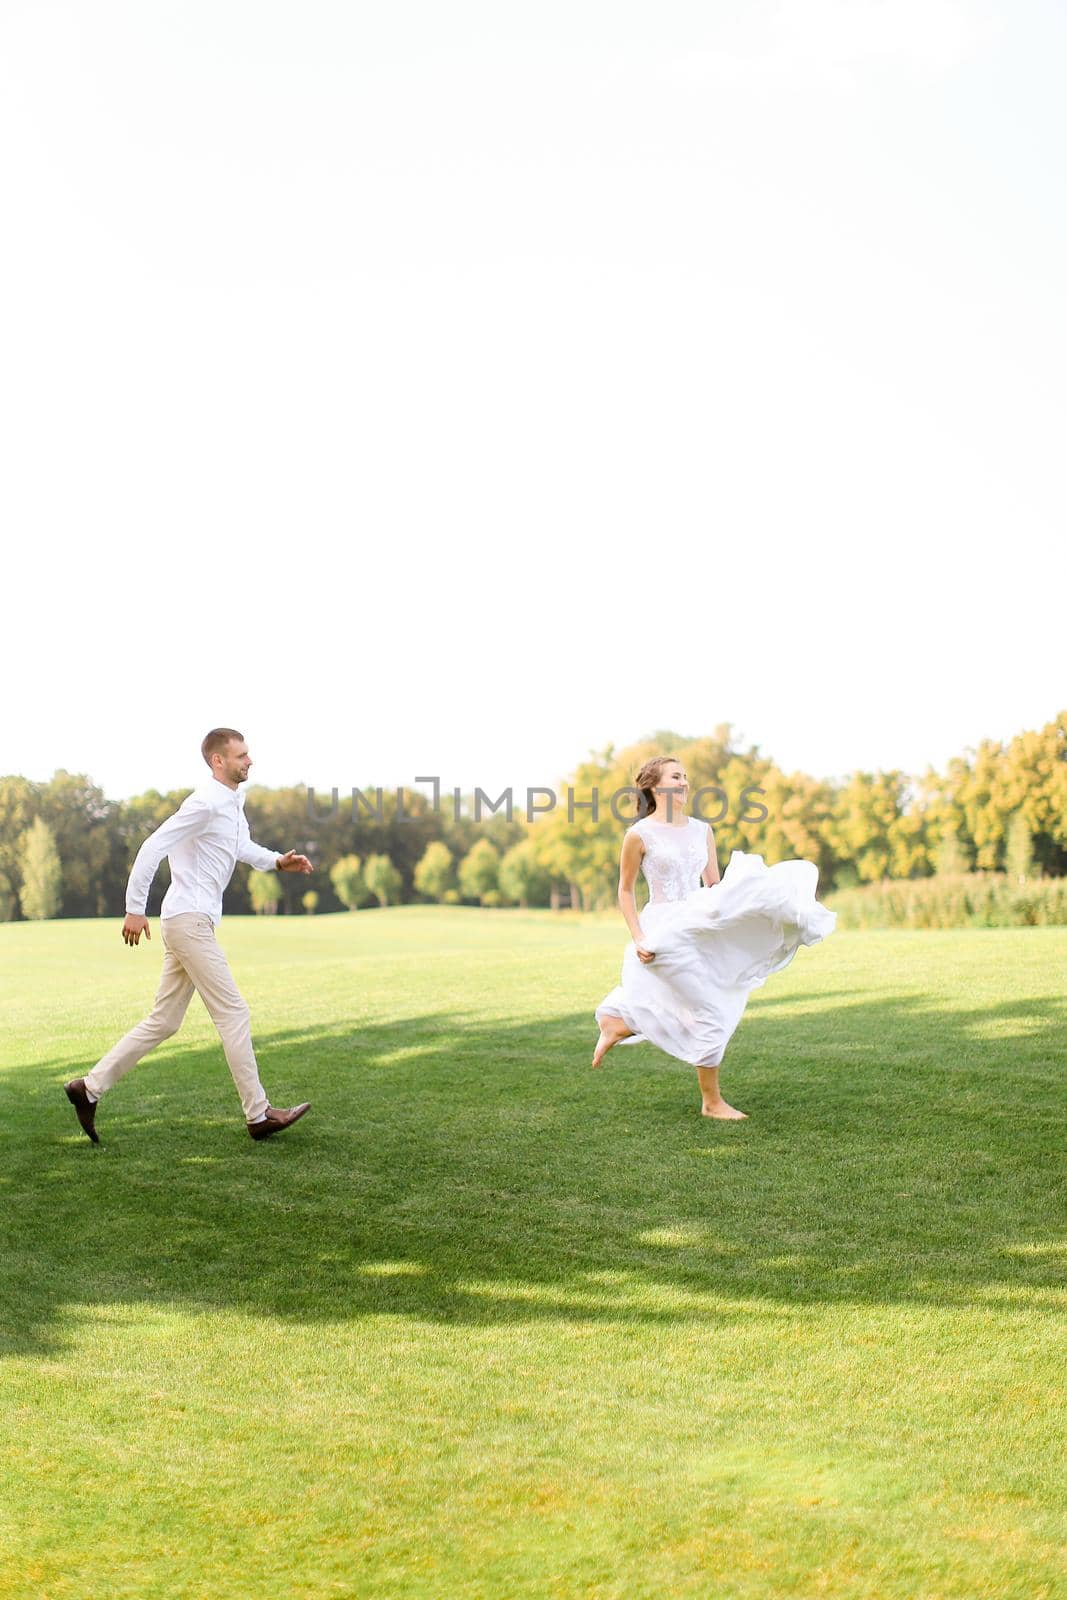 Groom and bride in white dress running and playing on grass. Concept of wedding photo session on open air and nature.